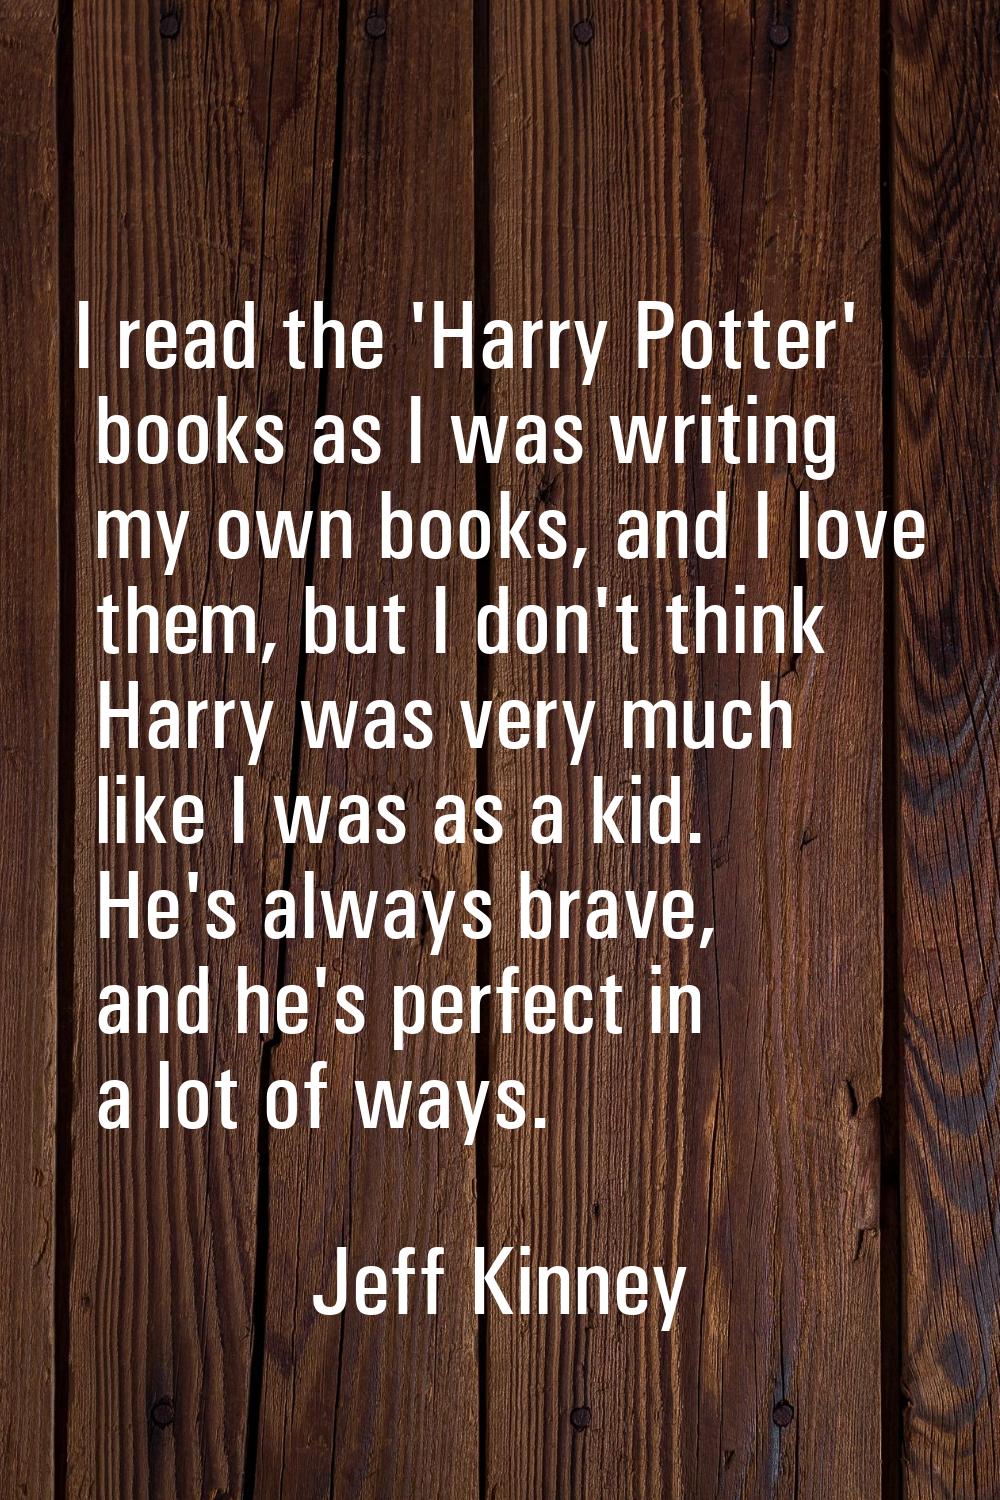 I read the 'Harry Potter' books as I was writing my own books, and I love them, but I don't think H